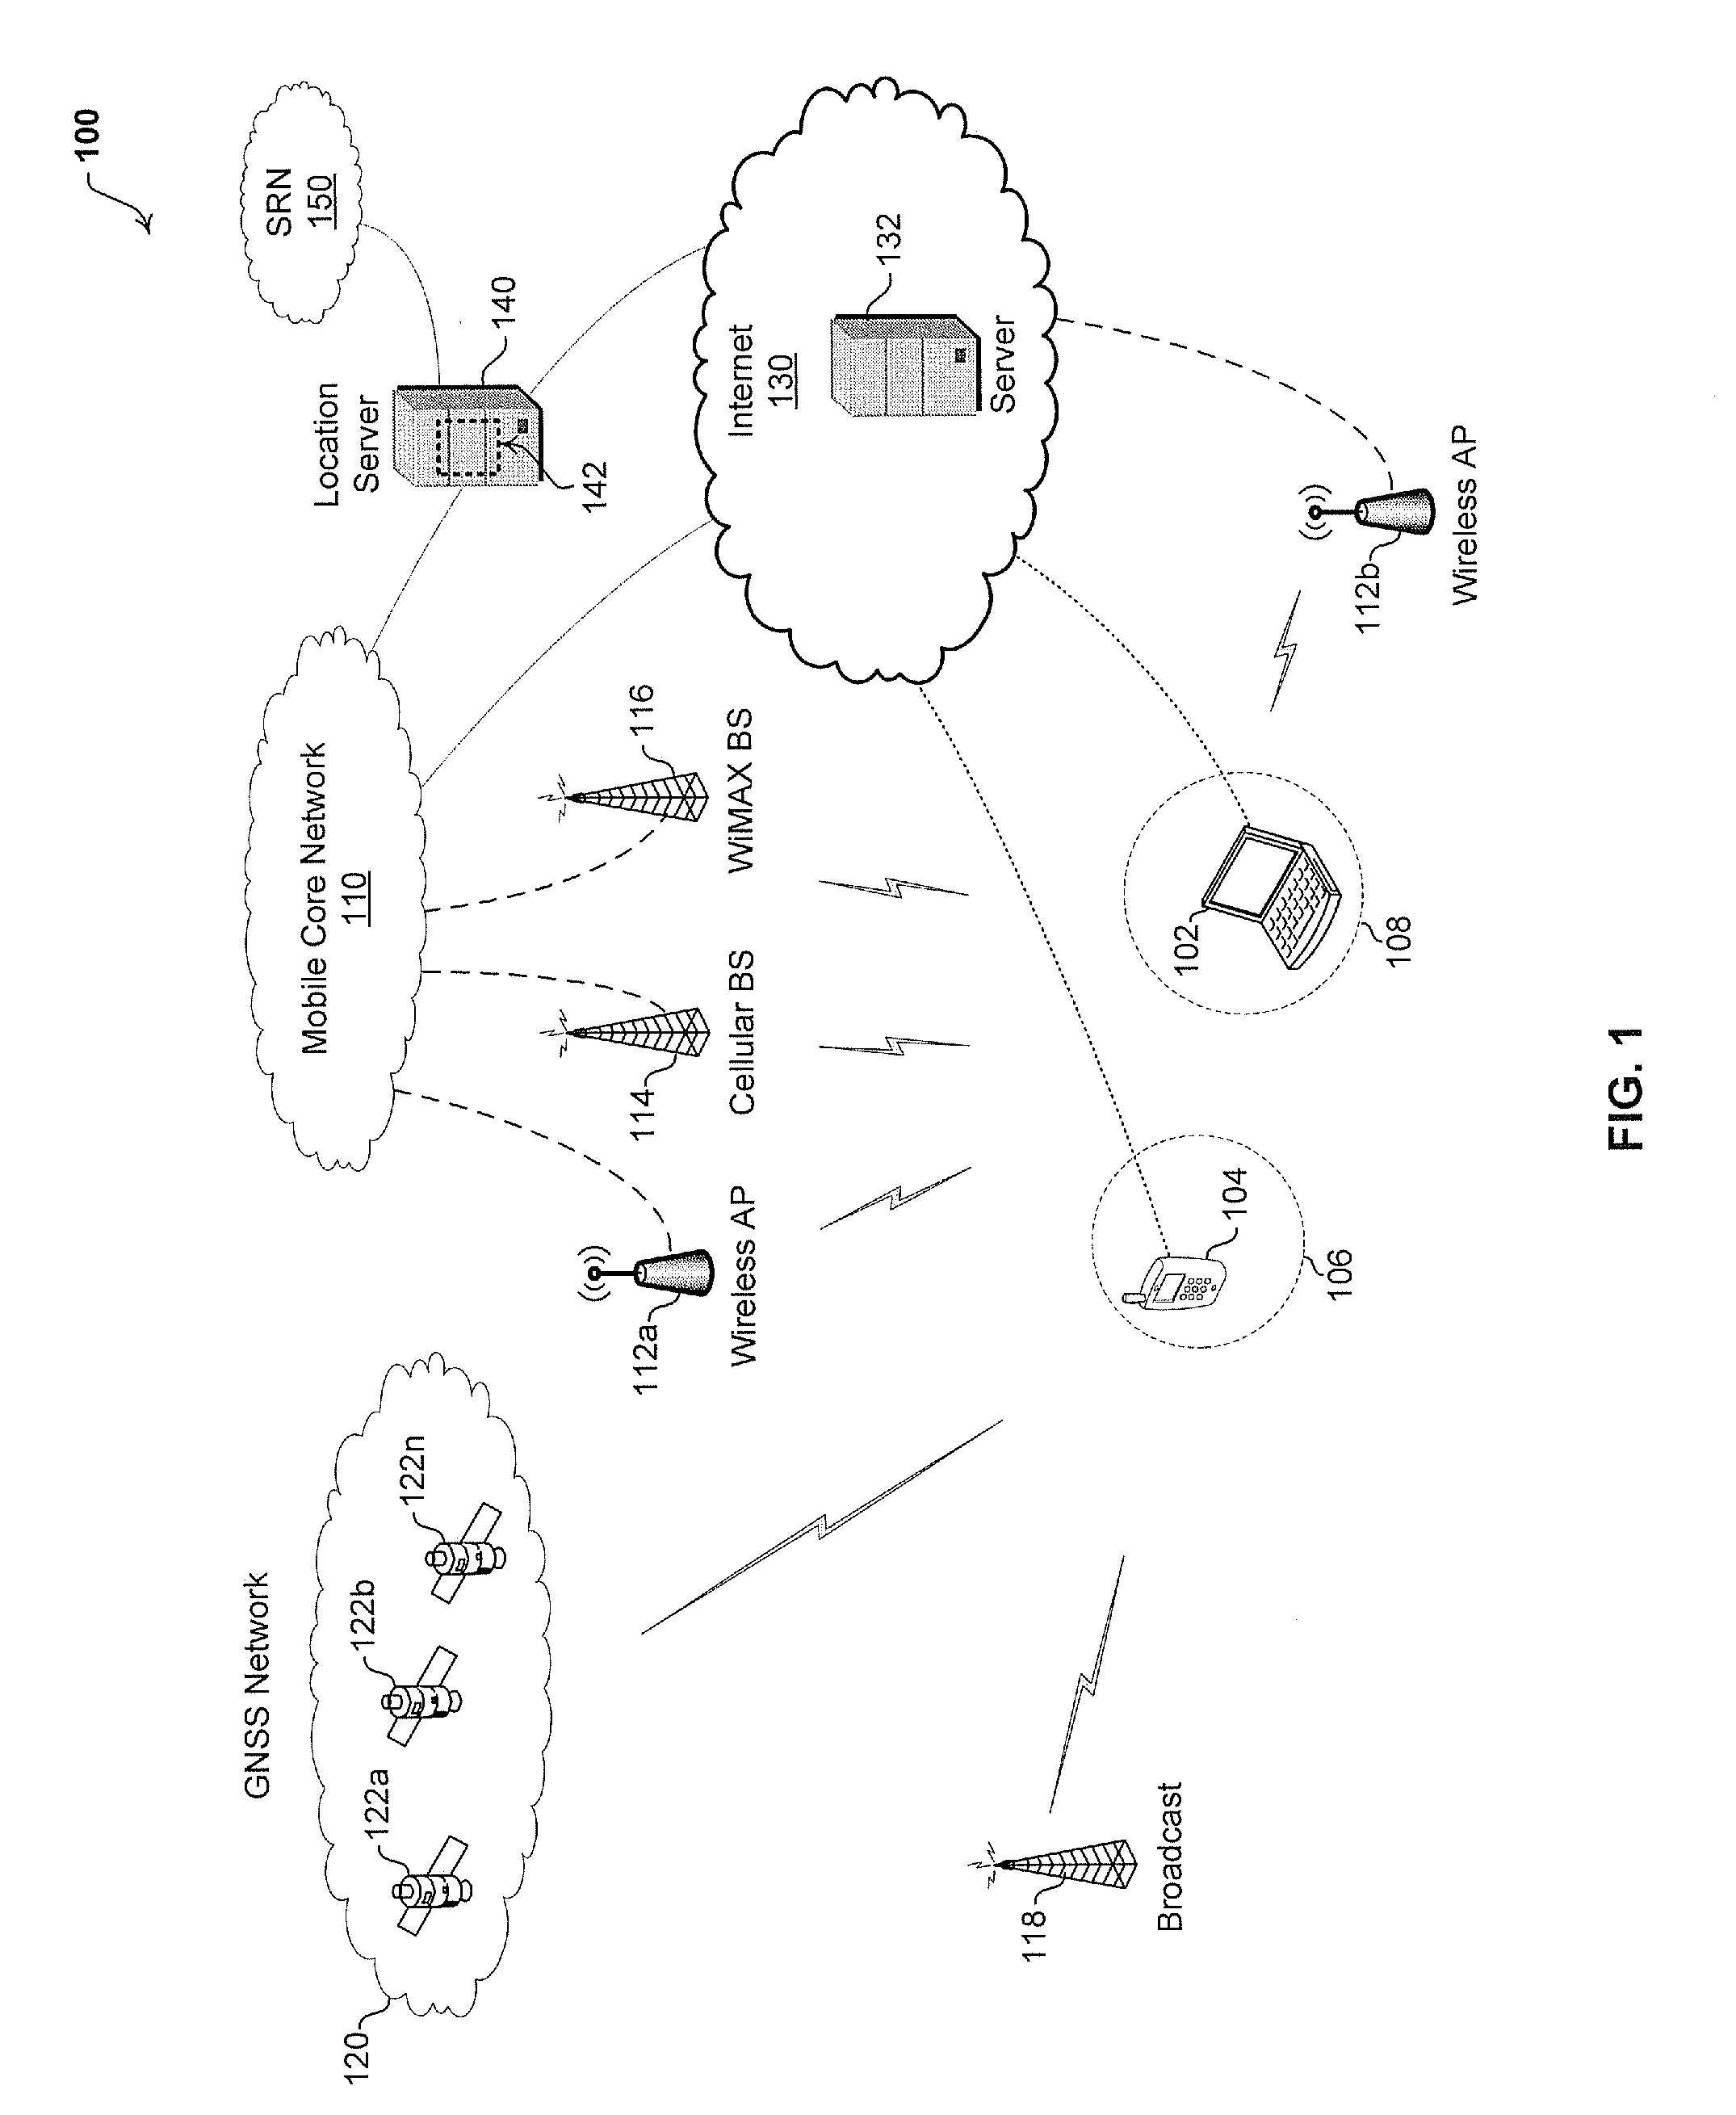 Method and system for authorizing transactions based on relative location of devices